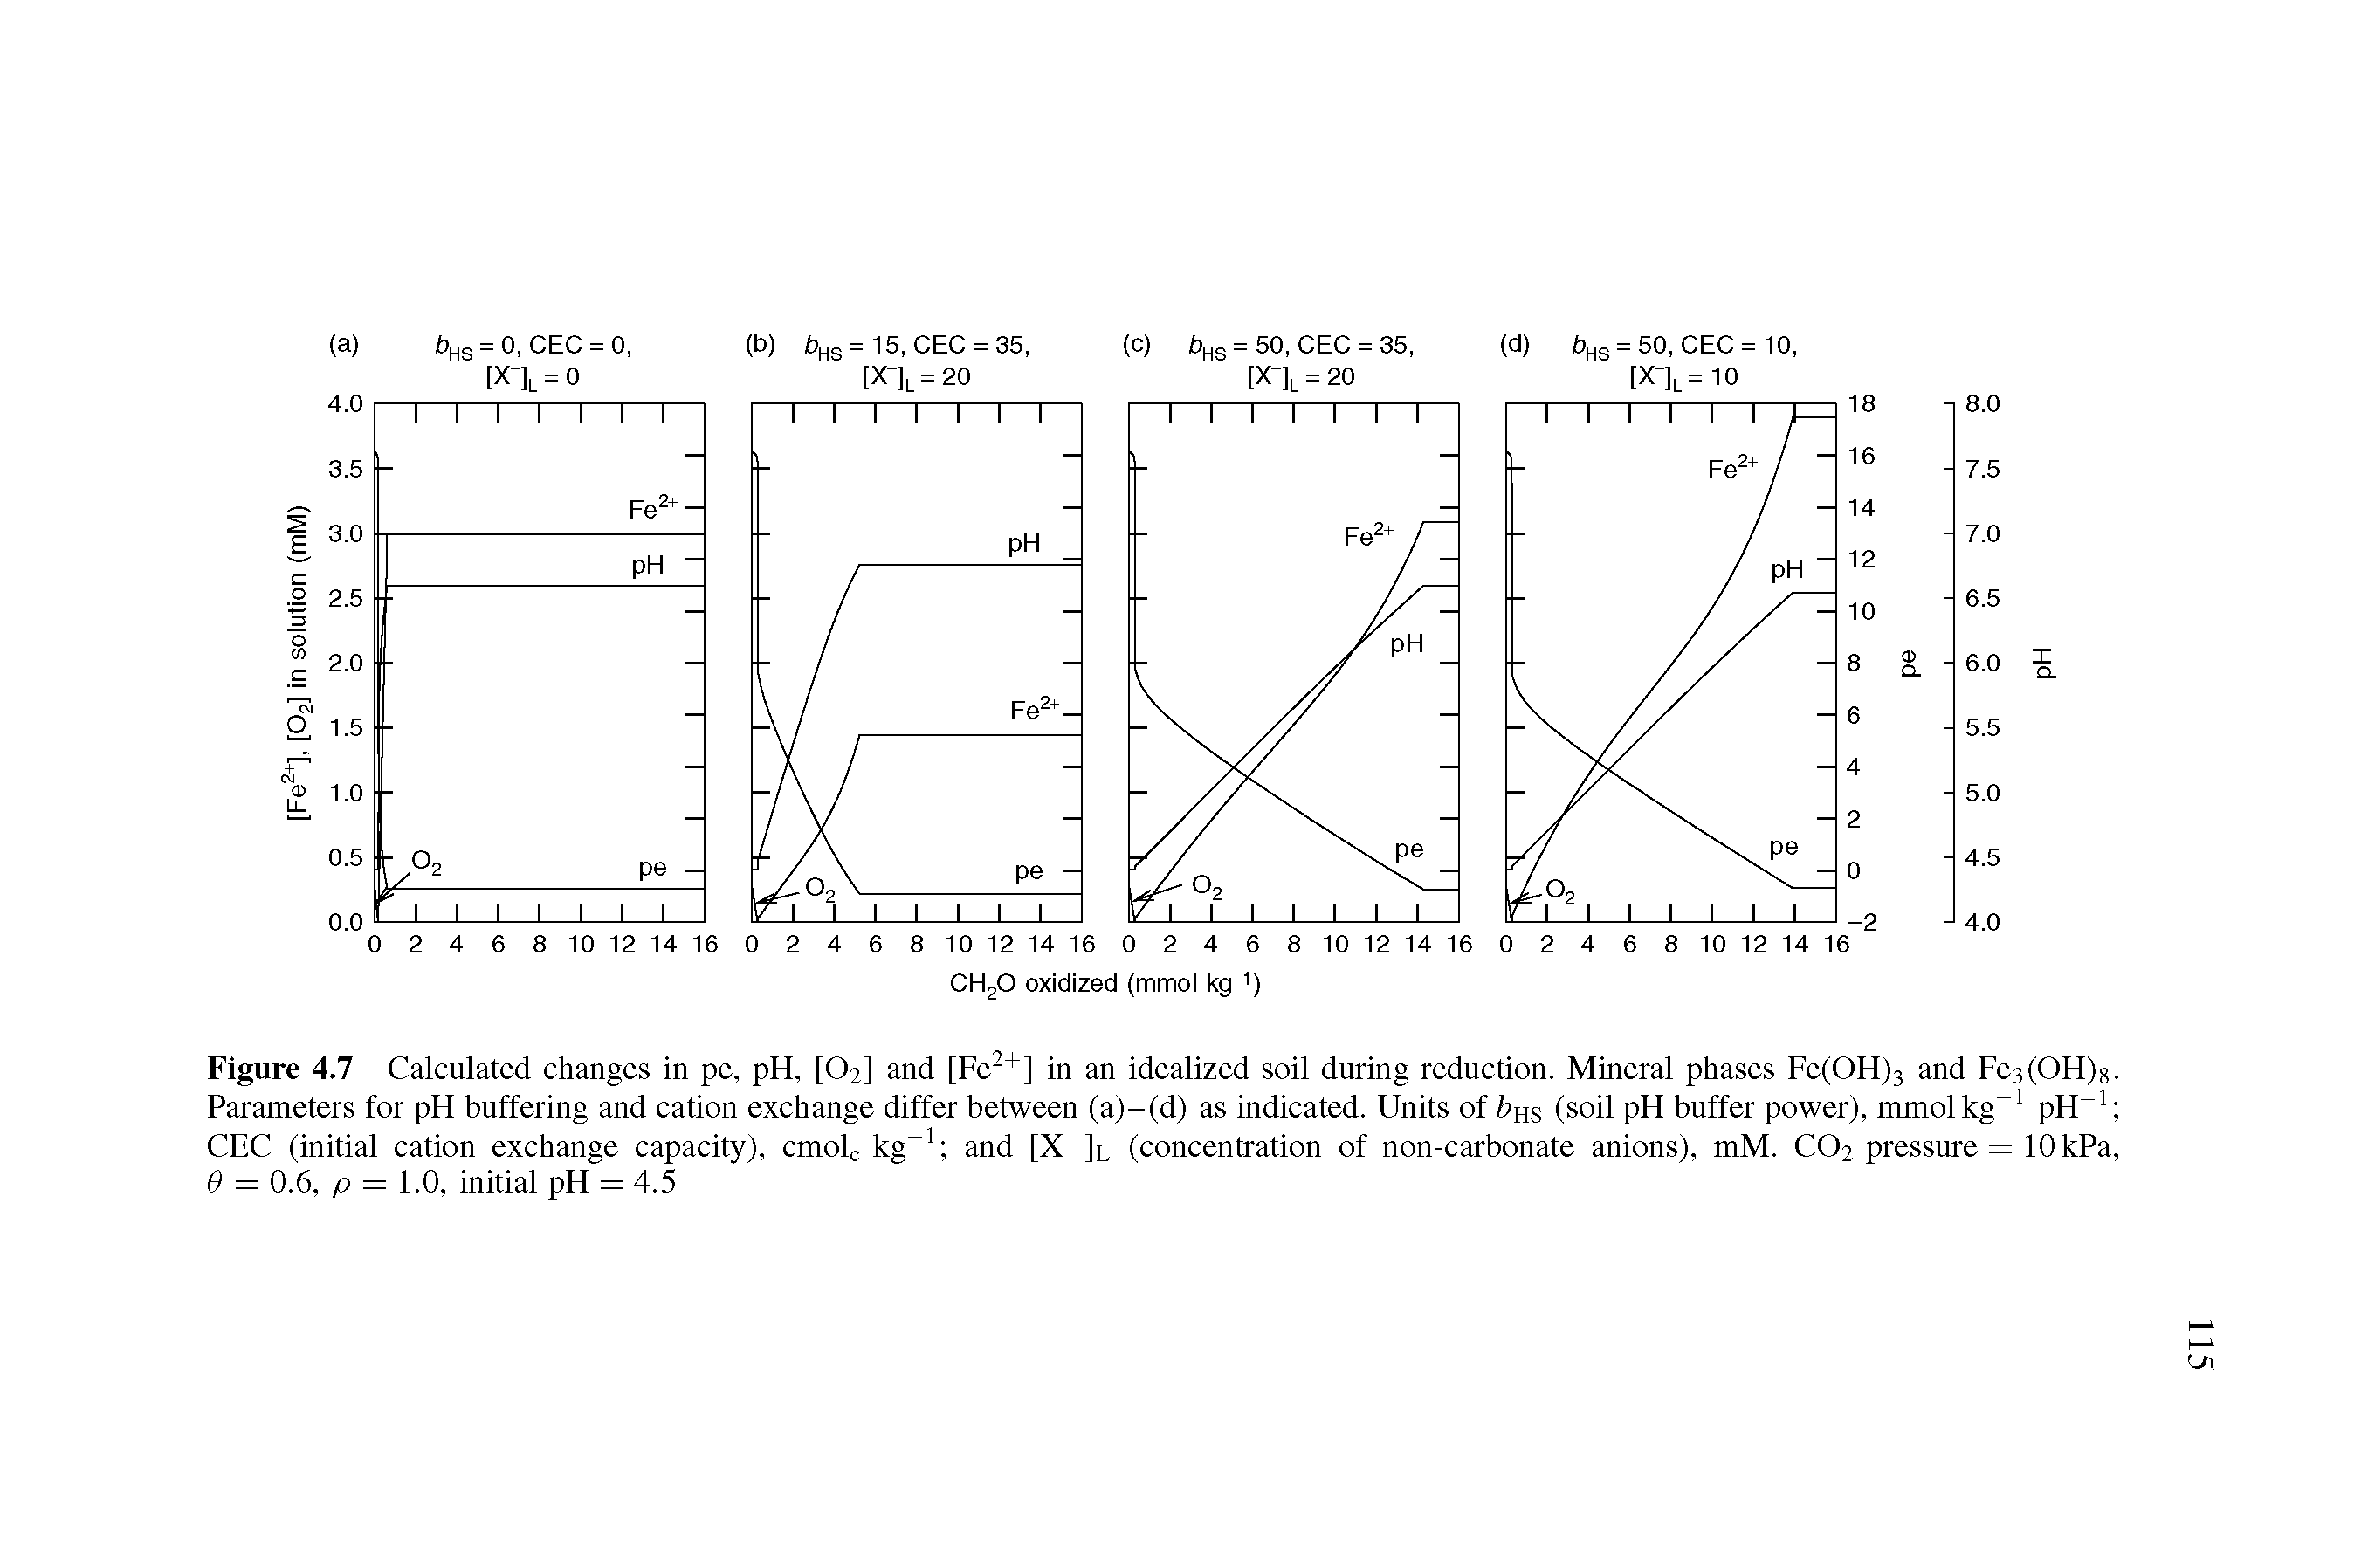 Figure 4.7 Calculated changes in pe, pH, [O2] and [Fe +] in an idealized soil during reduction. Mineral phases Fe(OH)3 and Fe3(OH)g. Parameters for pH buffering and cation exchange differ between (a)-(d) as indicated. Units of fees (soil pH buffer power), mmolkg pH CEC (initial cation exchange capacity), cmolc kg and [X ]l (concentration of non-carbonate anions), mM. CO2 pressure = lOkPa, 9 = 0.6, p = 1.0, initial pH = 4.5...